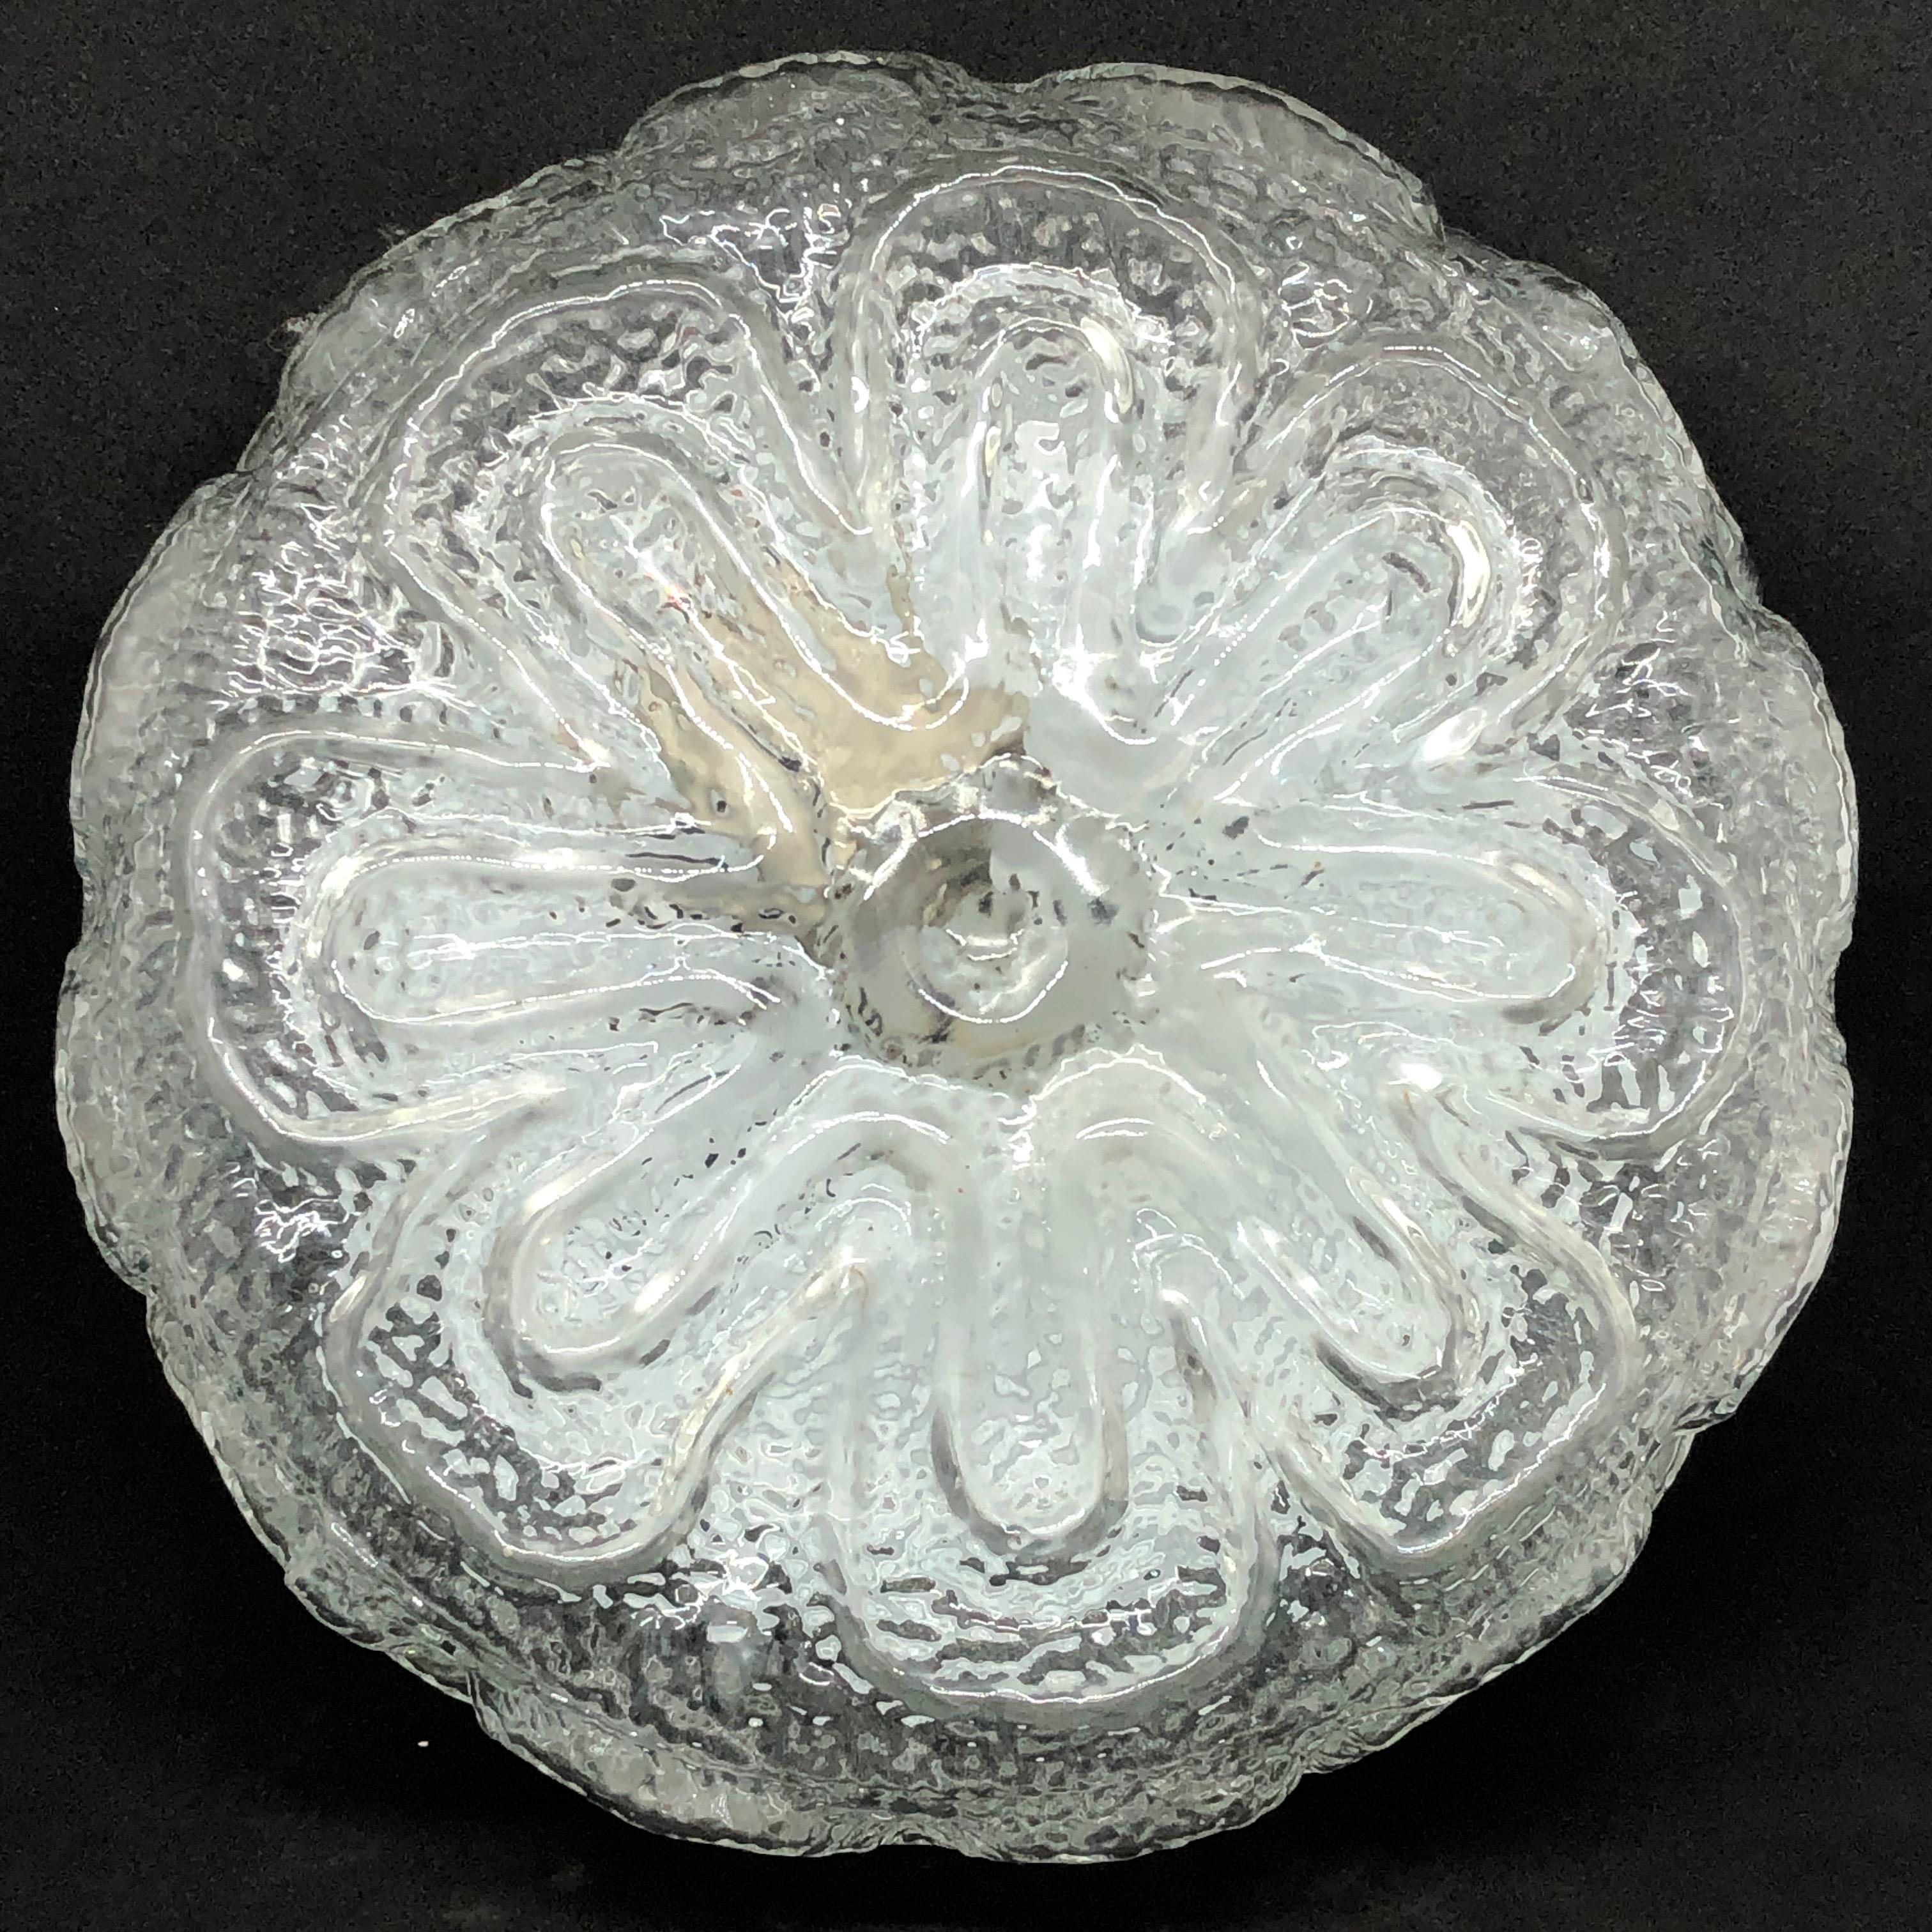 Petite flower pattern flush mount. Gorgeous textured glass flush mount with metal fixture. The fixture requires one European E27 Edison or Medium bulb up to 60 watts.